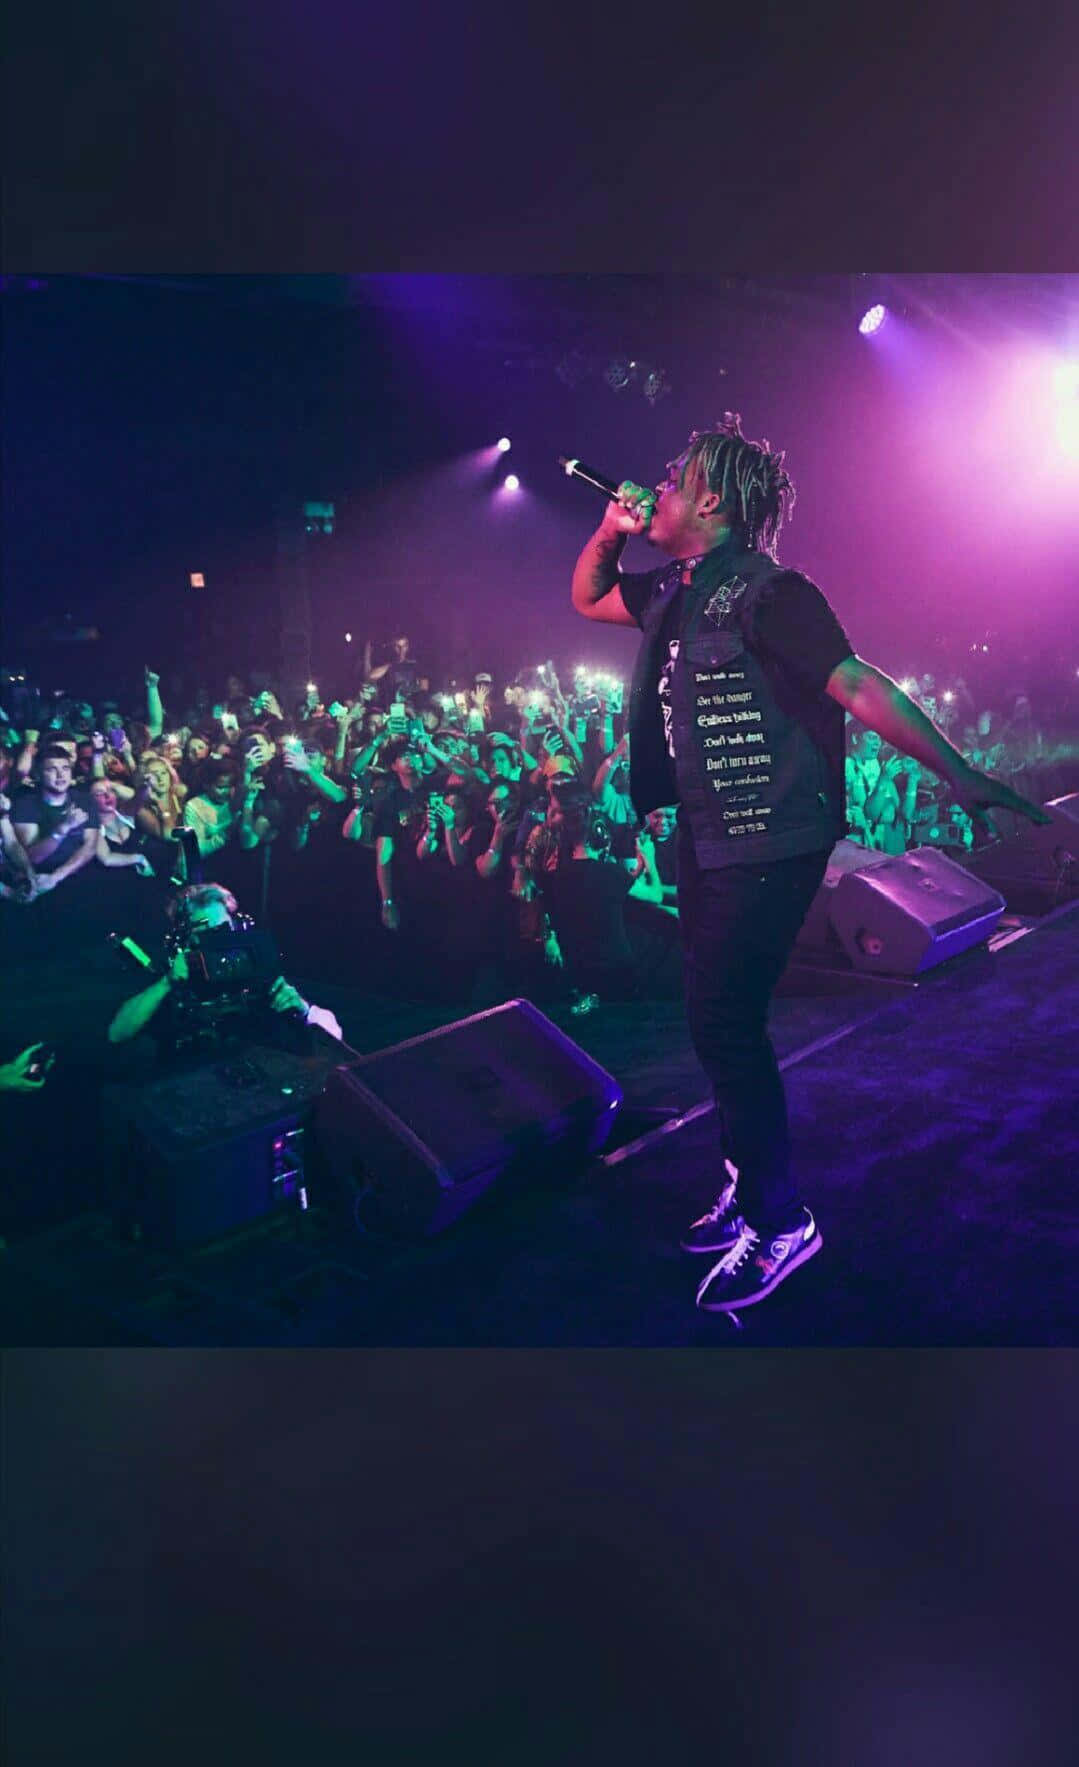 "Feeling inspired after seeing Juice Wrld in concert!" Wallpaper